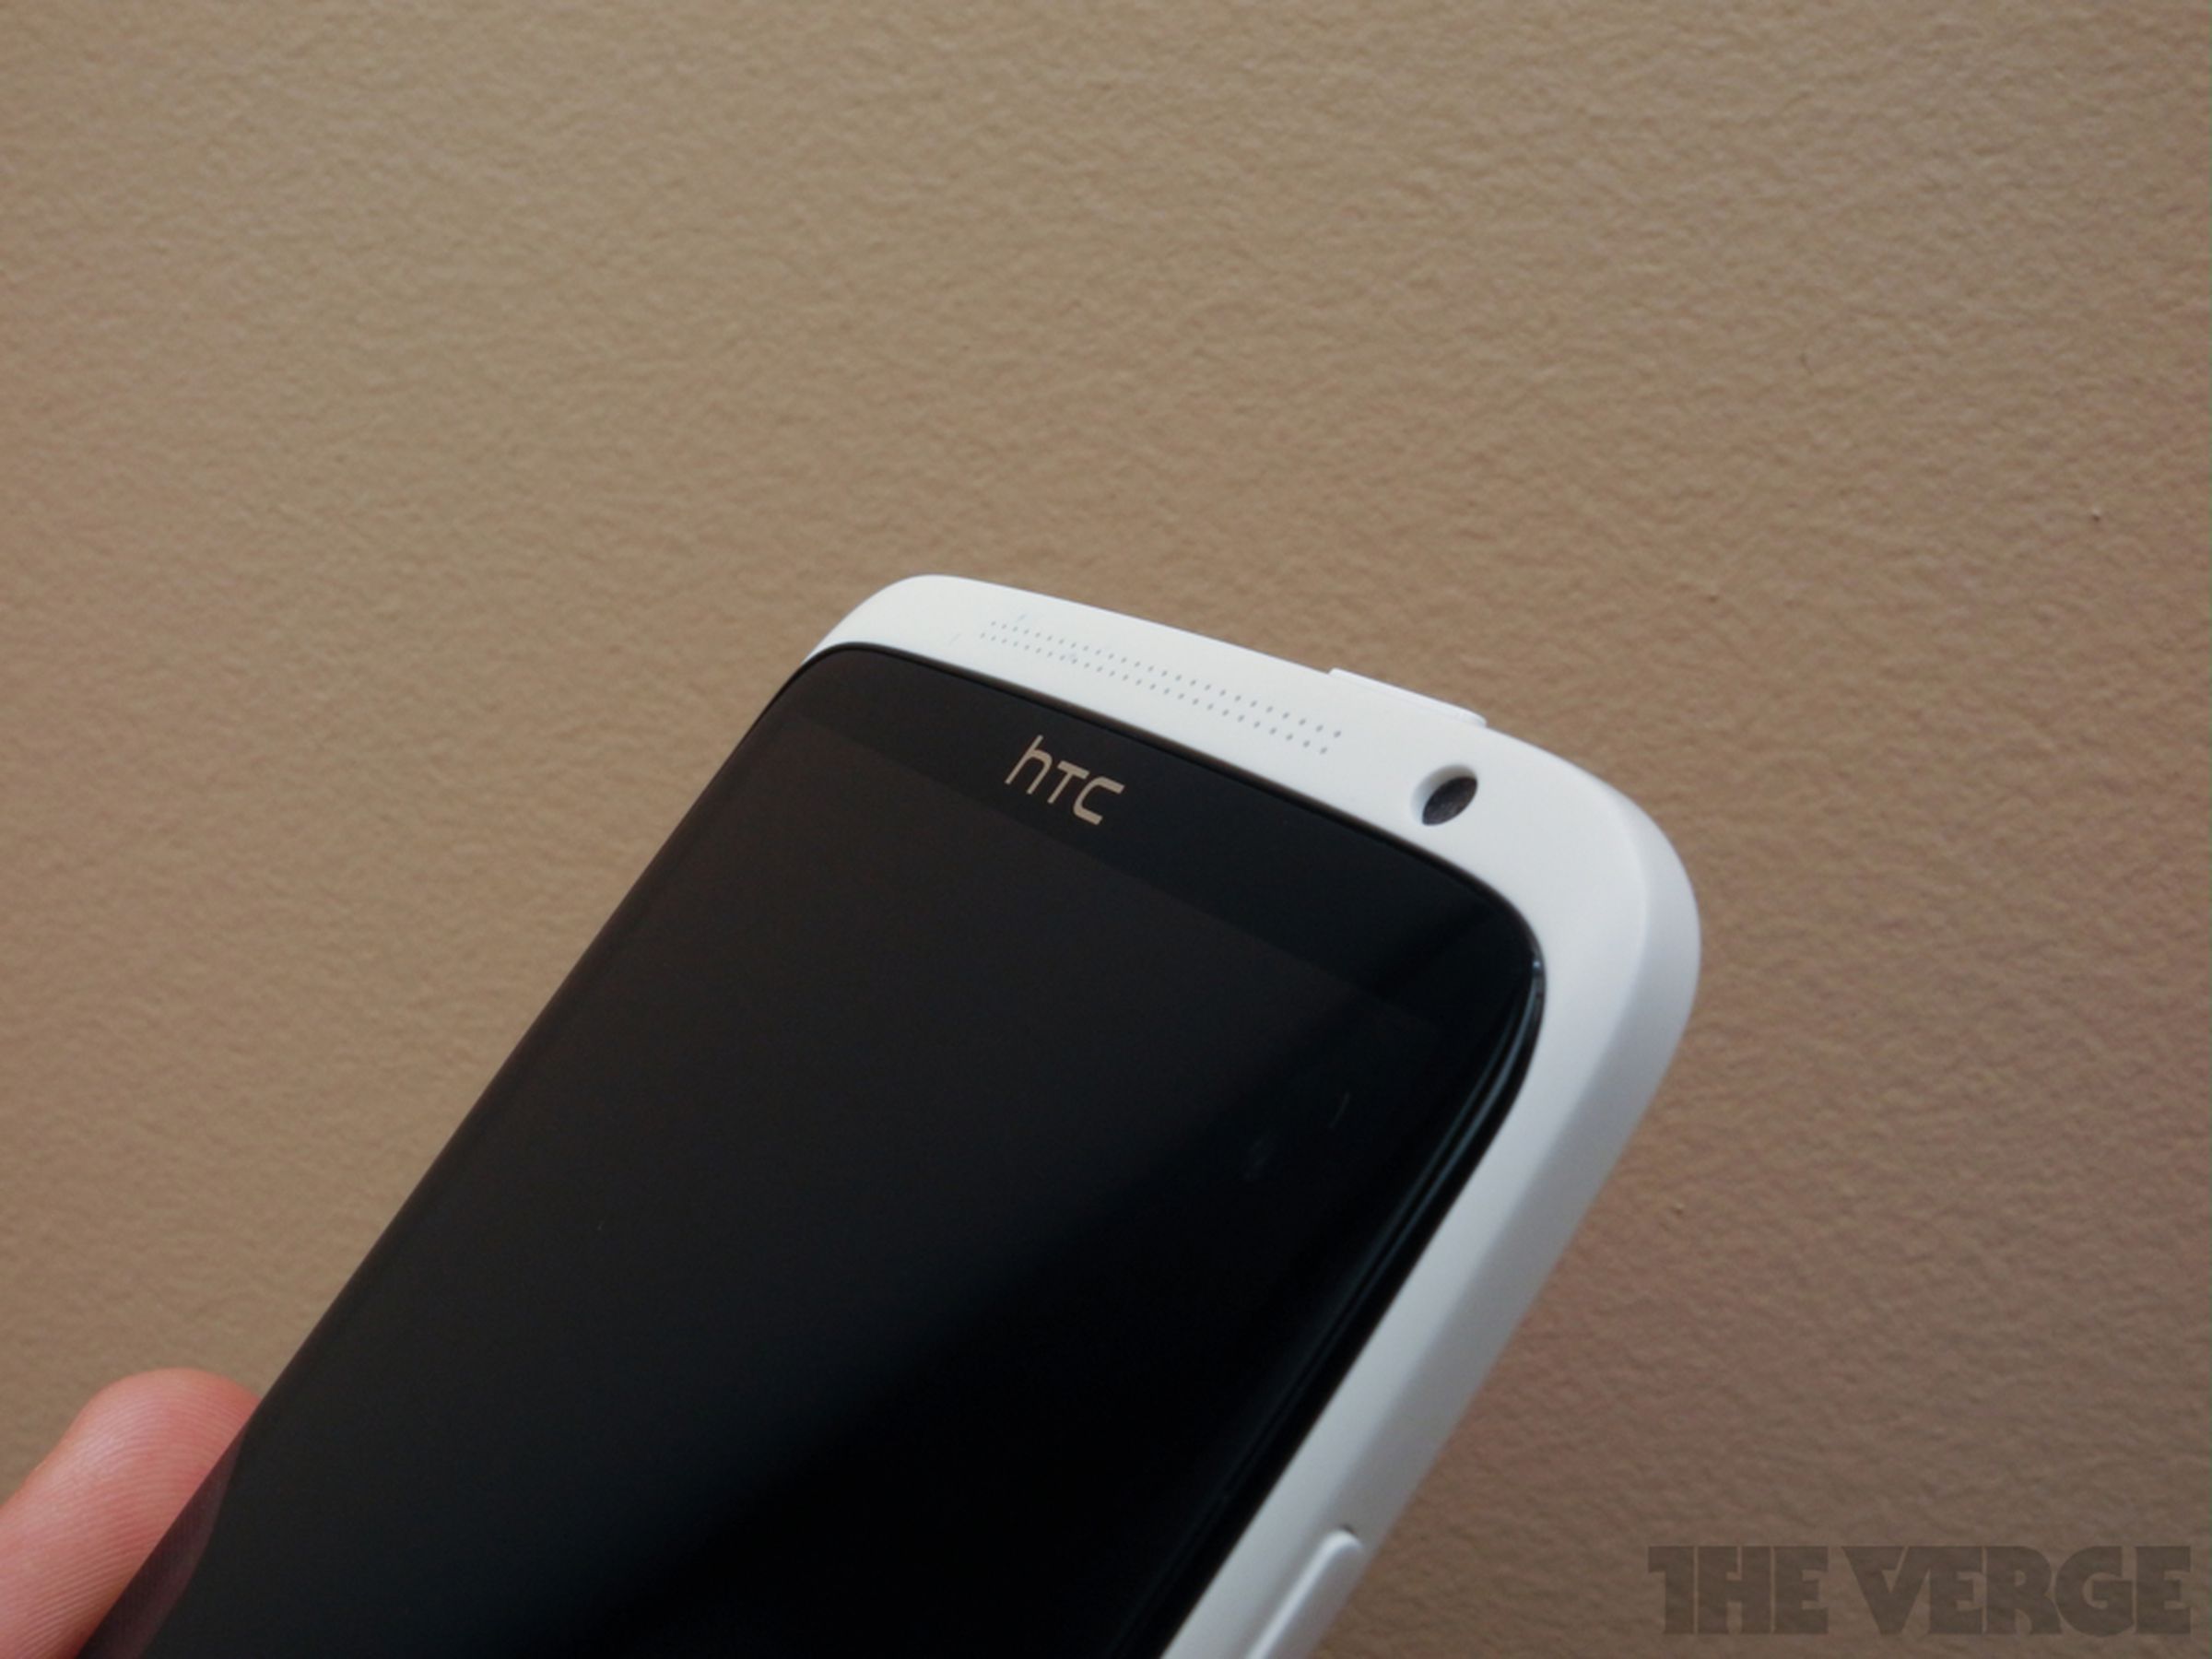 HTC One X review